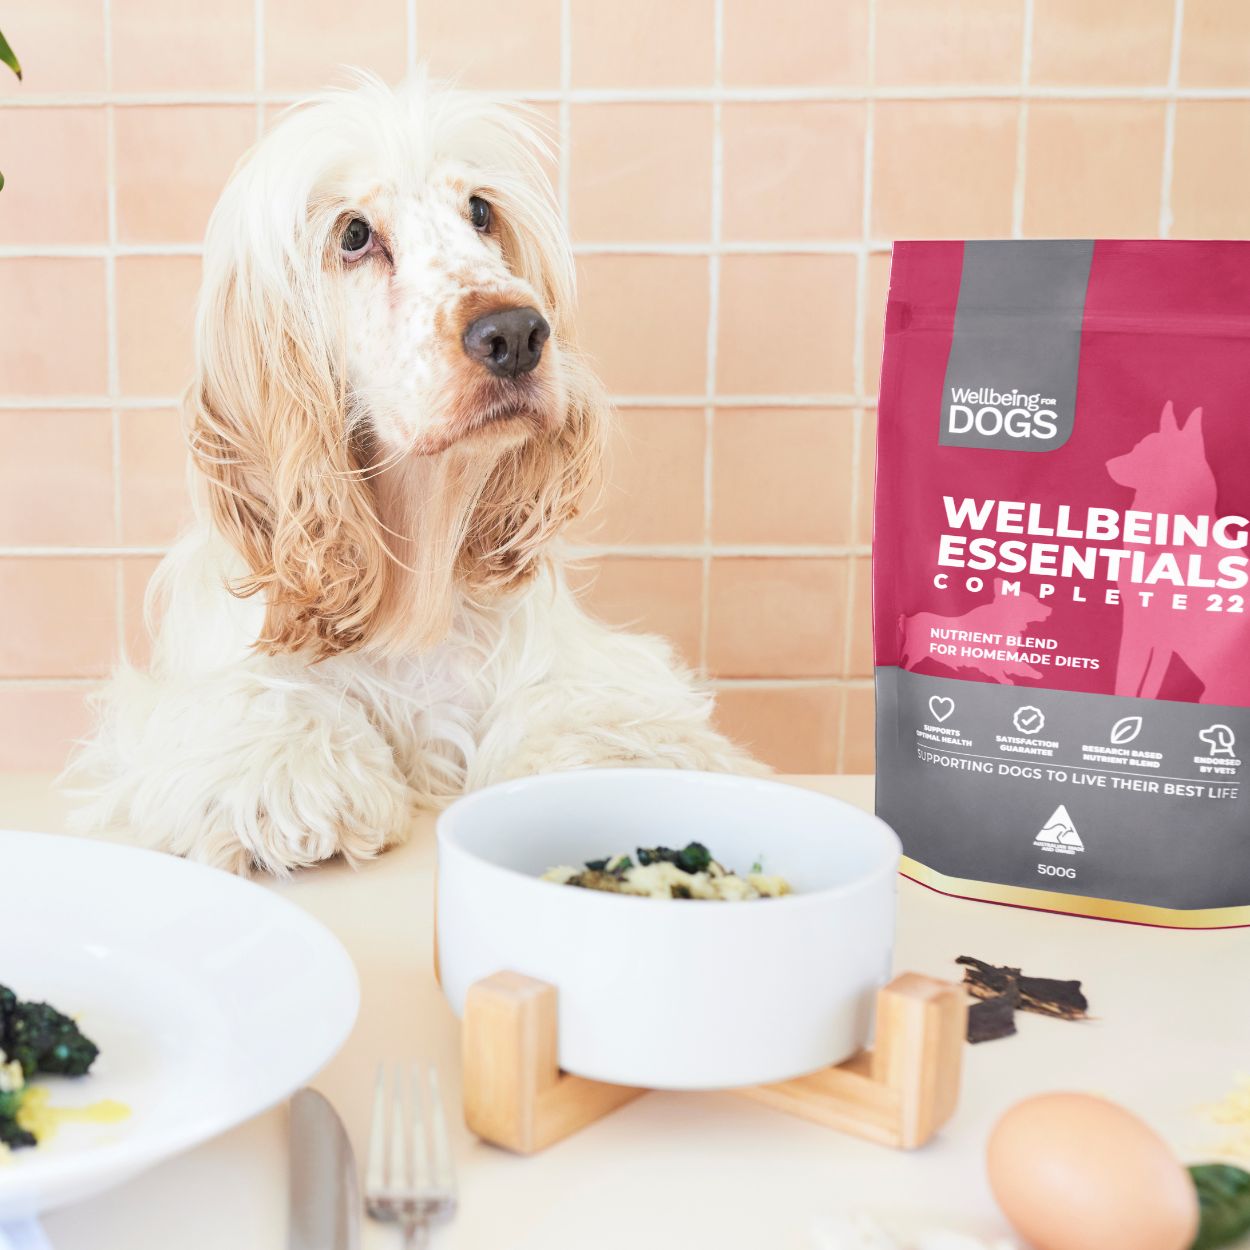 Dog posing next to Wellbeing Essentials Complete 22